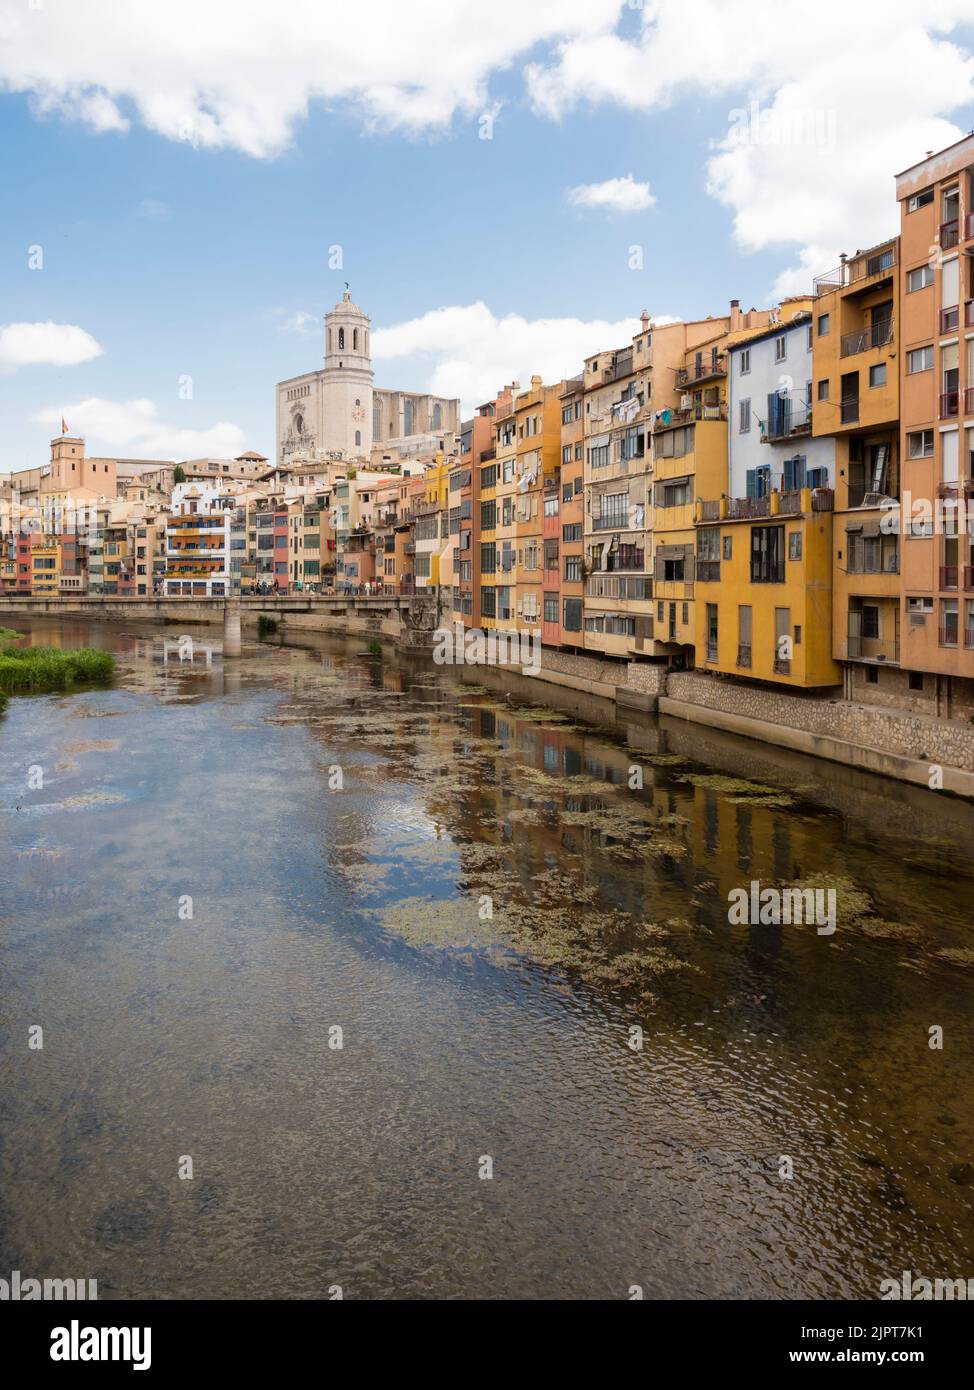 Girona, Spain - 26 June 2022: view of the old town of Girona with the river Onyar (Catalunia, Spain). Stock Photo